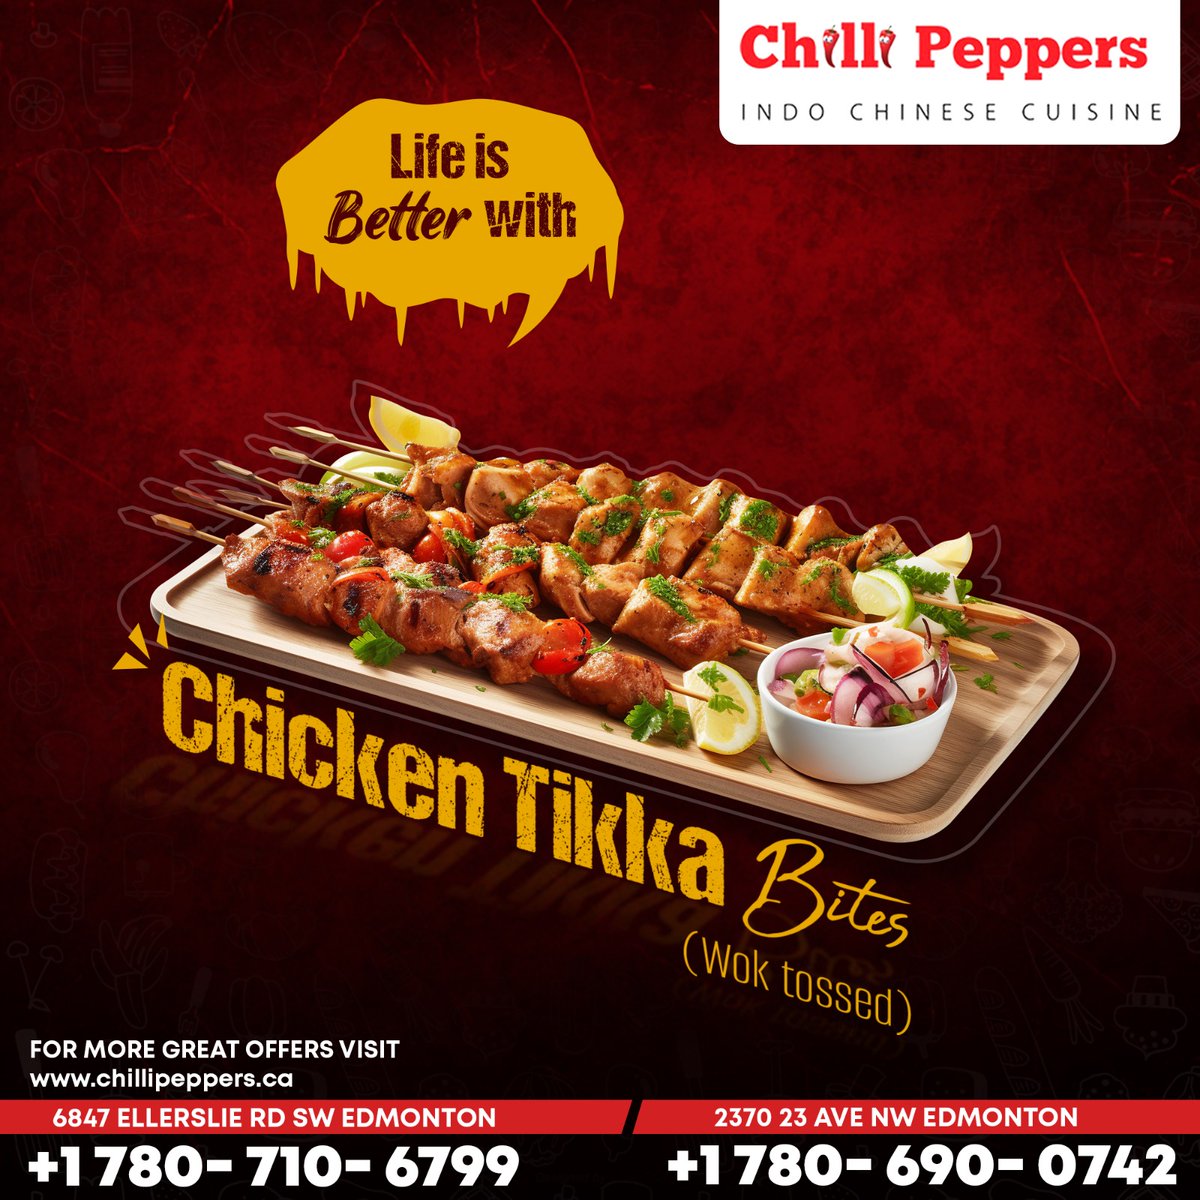 Life is always better with a little bit of spice and some chicken tikka bites.  So go ahead, treat yourself to some deliciousness and let the flavors transport you to a place of pure joy. #ChickenTikkaBites #ComfortFood #SpiceUpYourLife'